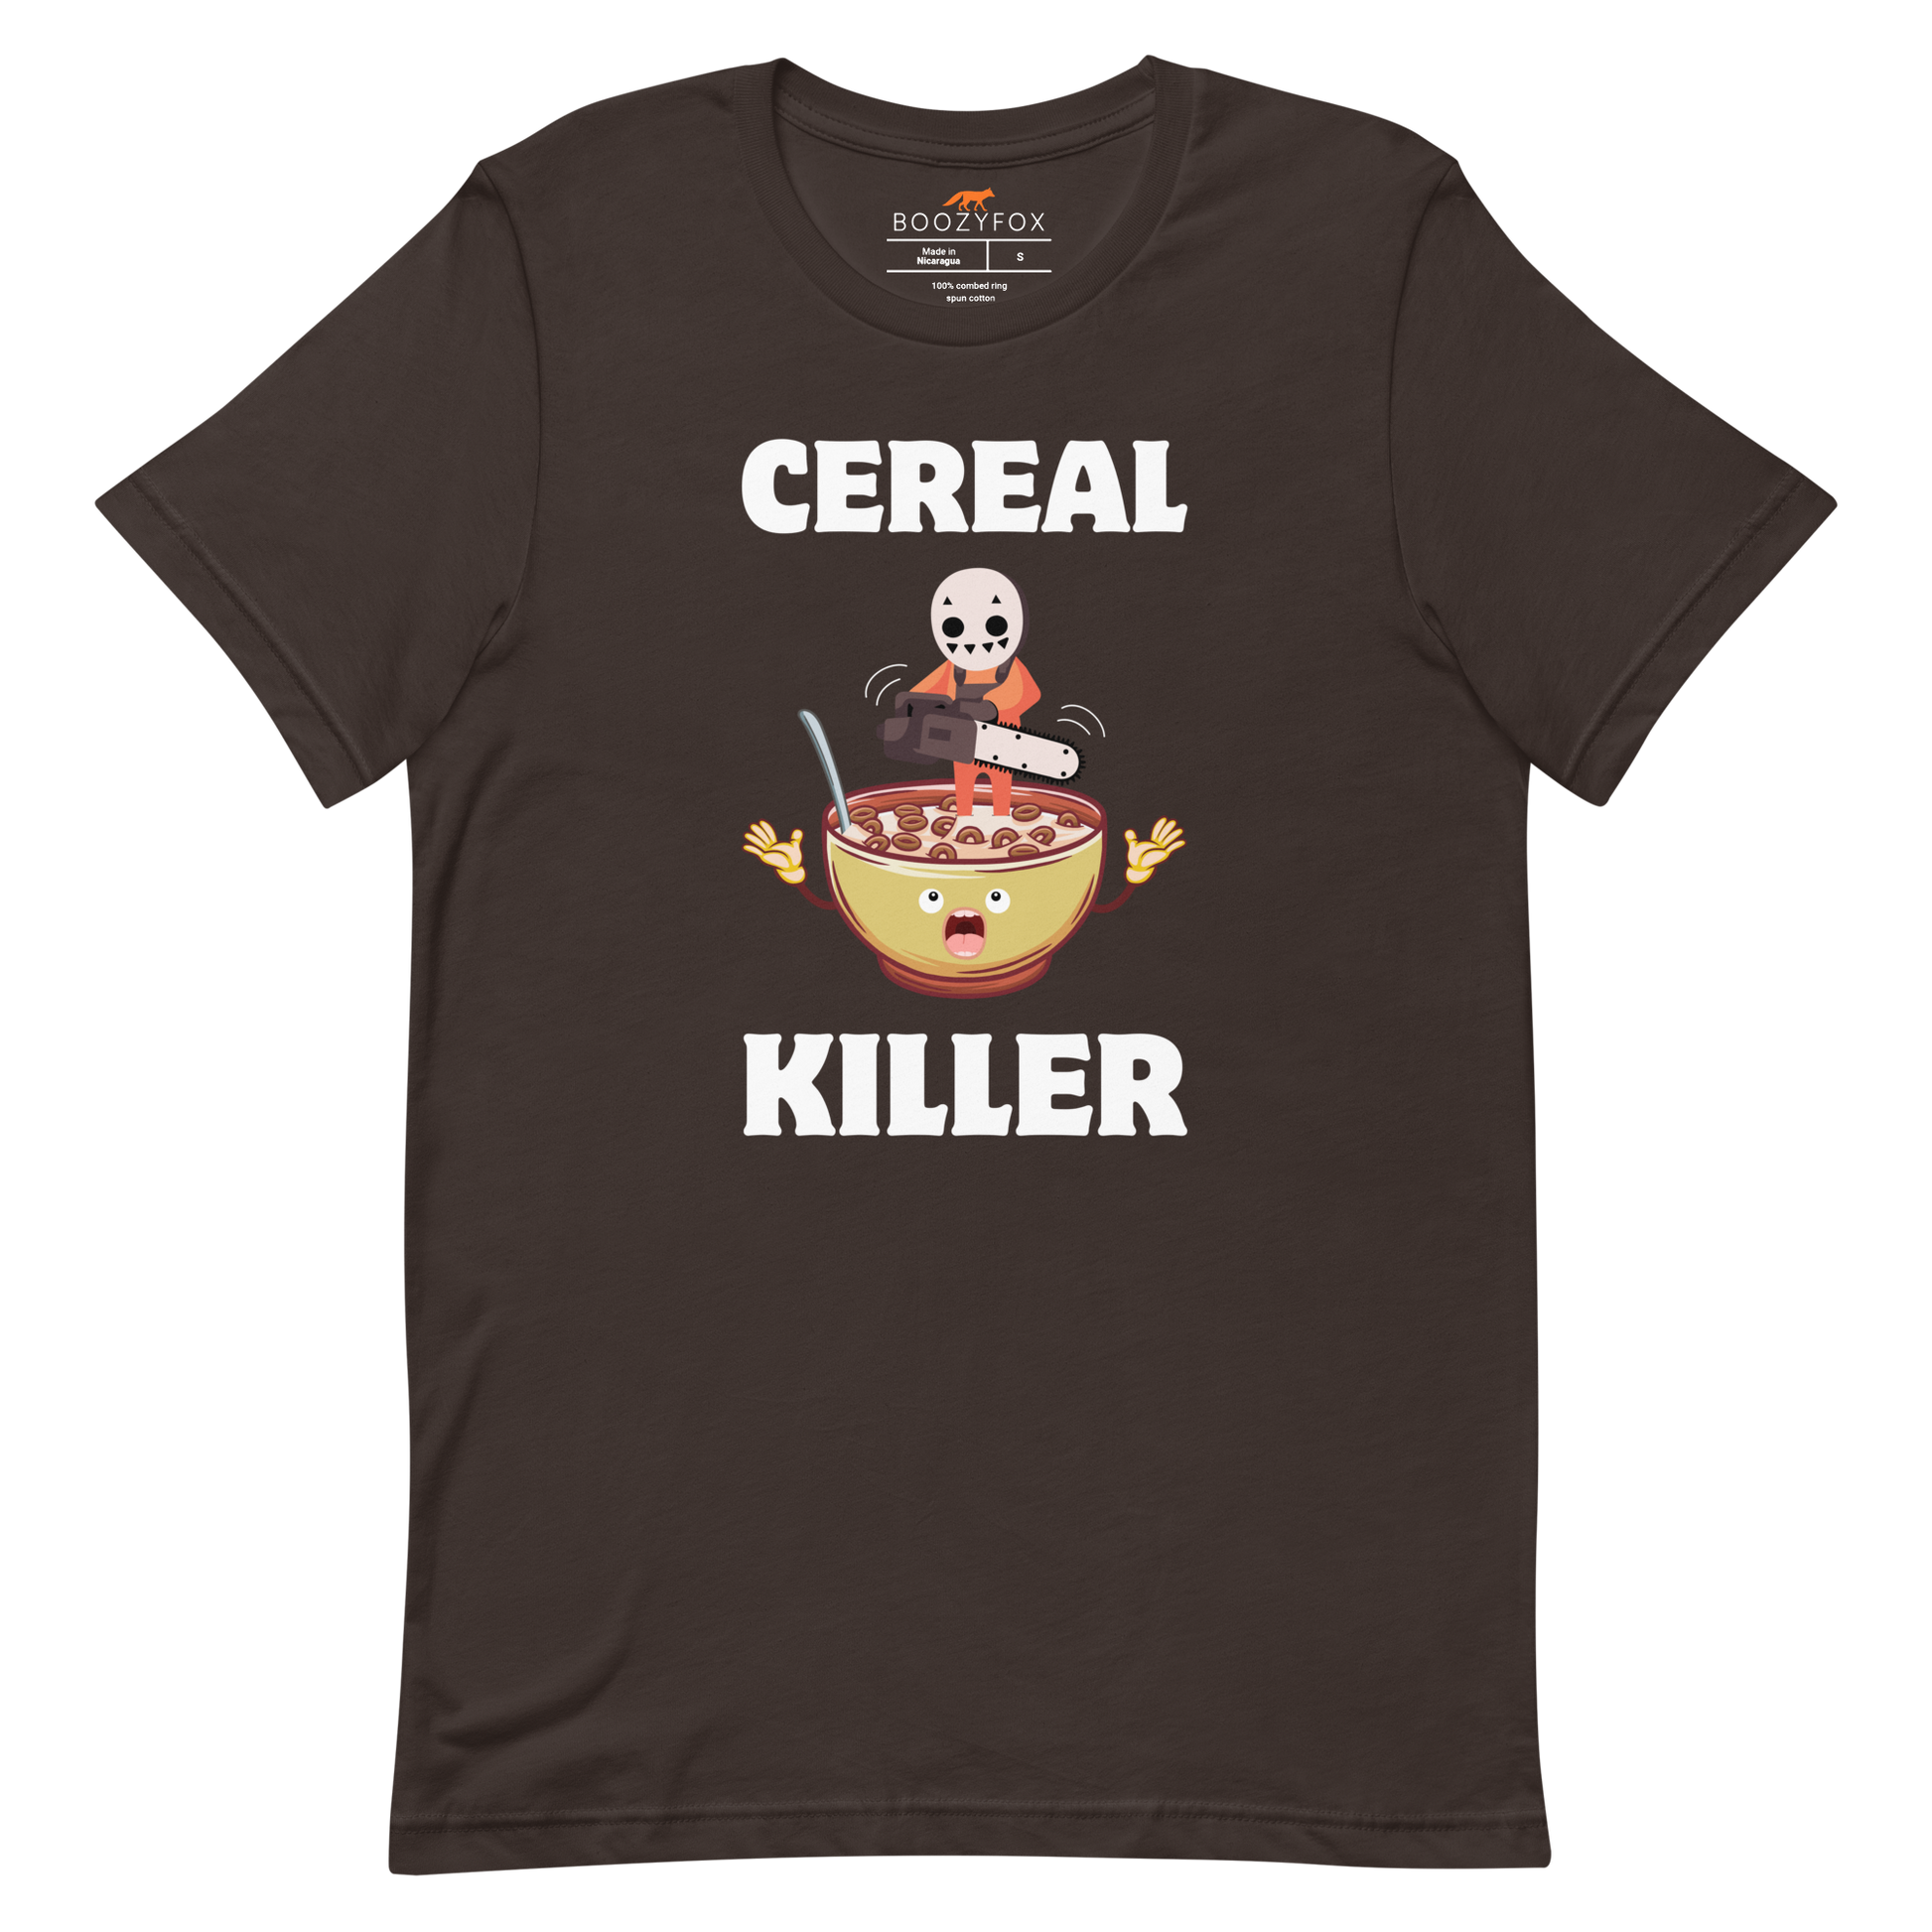 Brown Premium Cereal Killer Tee featuring a Cereal Killer graphic on the chest - Funny Graphic Tees - Boozy Fox